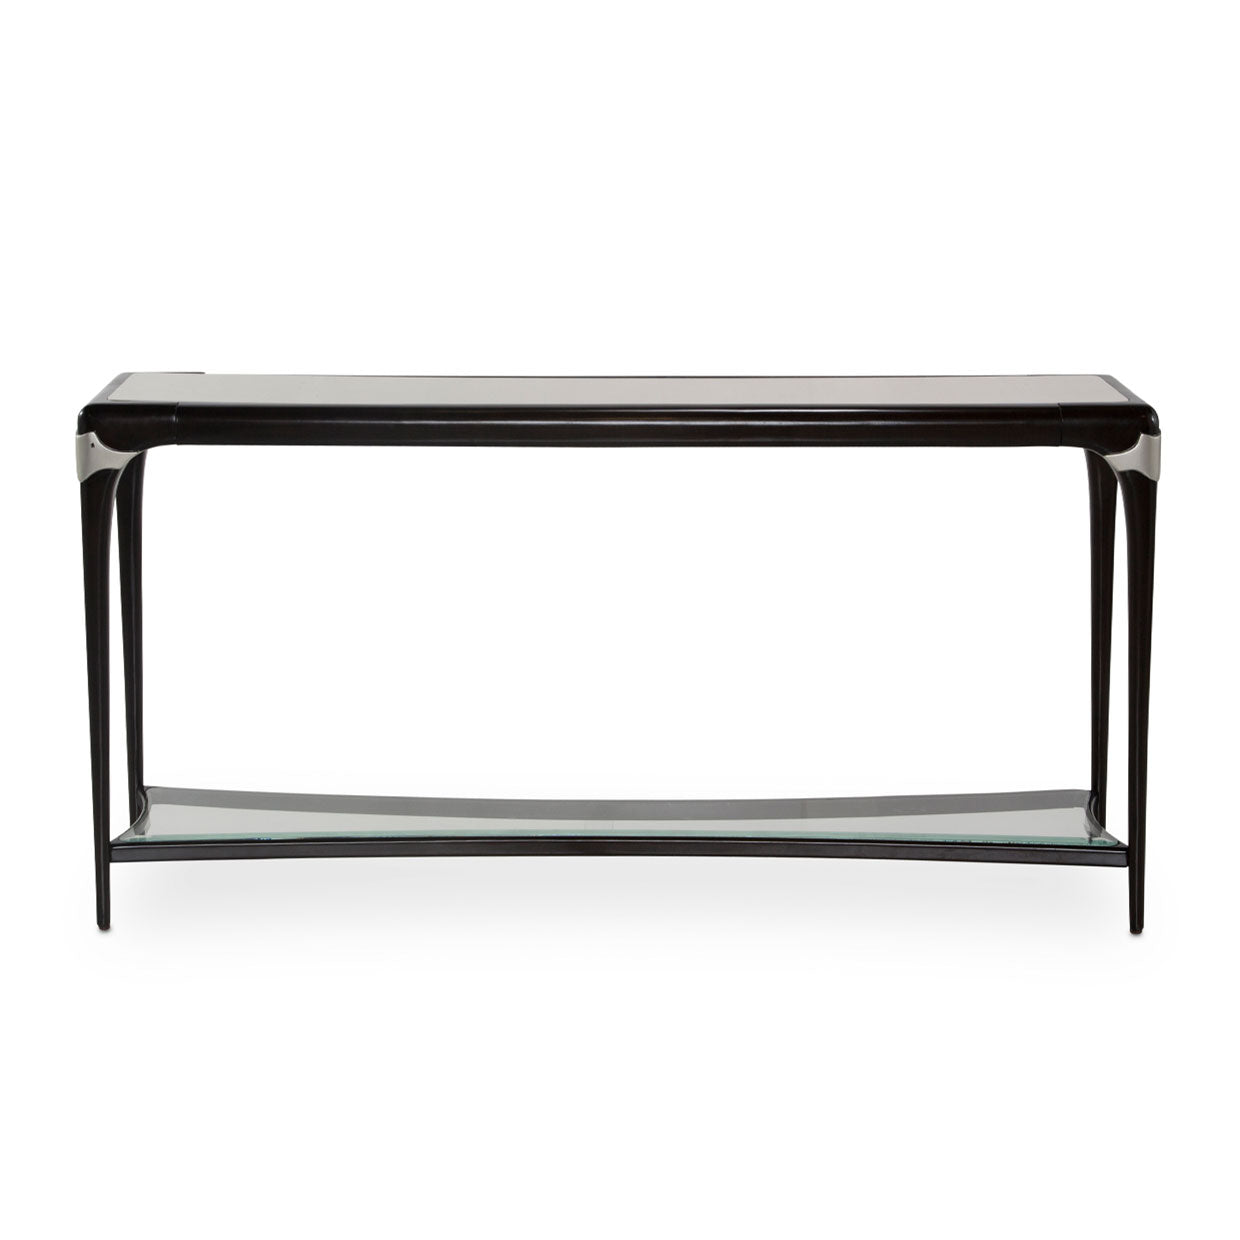 Paris Chic Console Table, Classy shapes, Glamorous home, Winged glass stretcher, Stunning, Accents, Family photos, Platinum finish, Cultured marble, Beveled glass, Wing shape, dream art , Michael amini